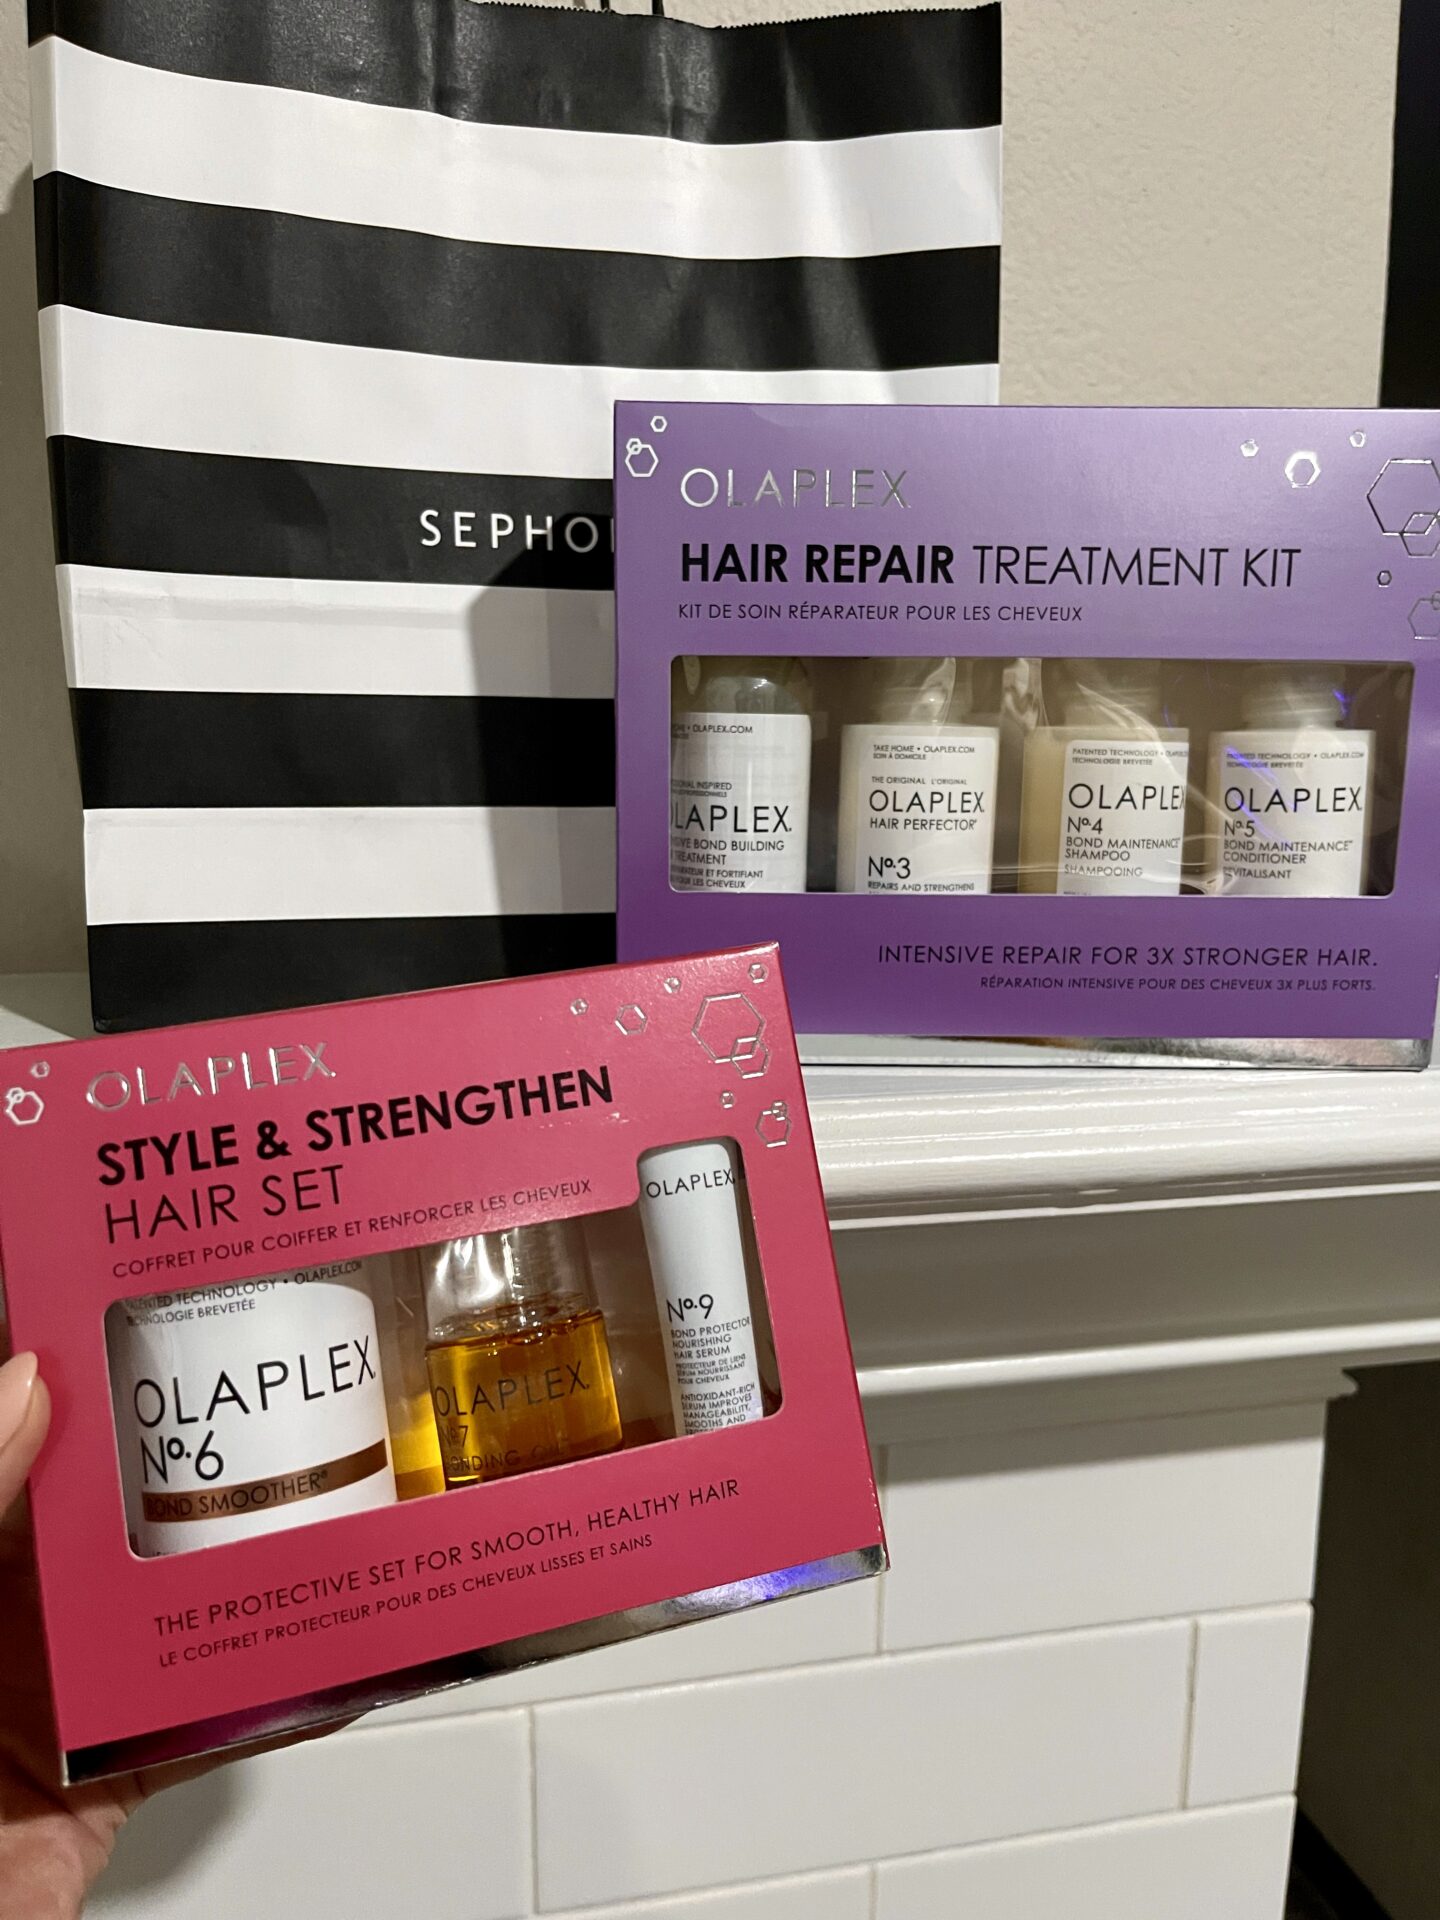 Sephora Gifts for All Event Olaplex gift sets